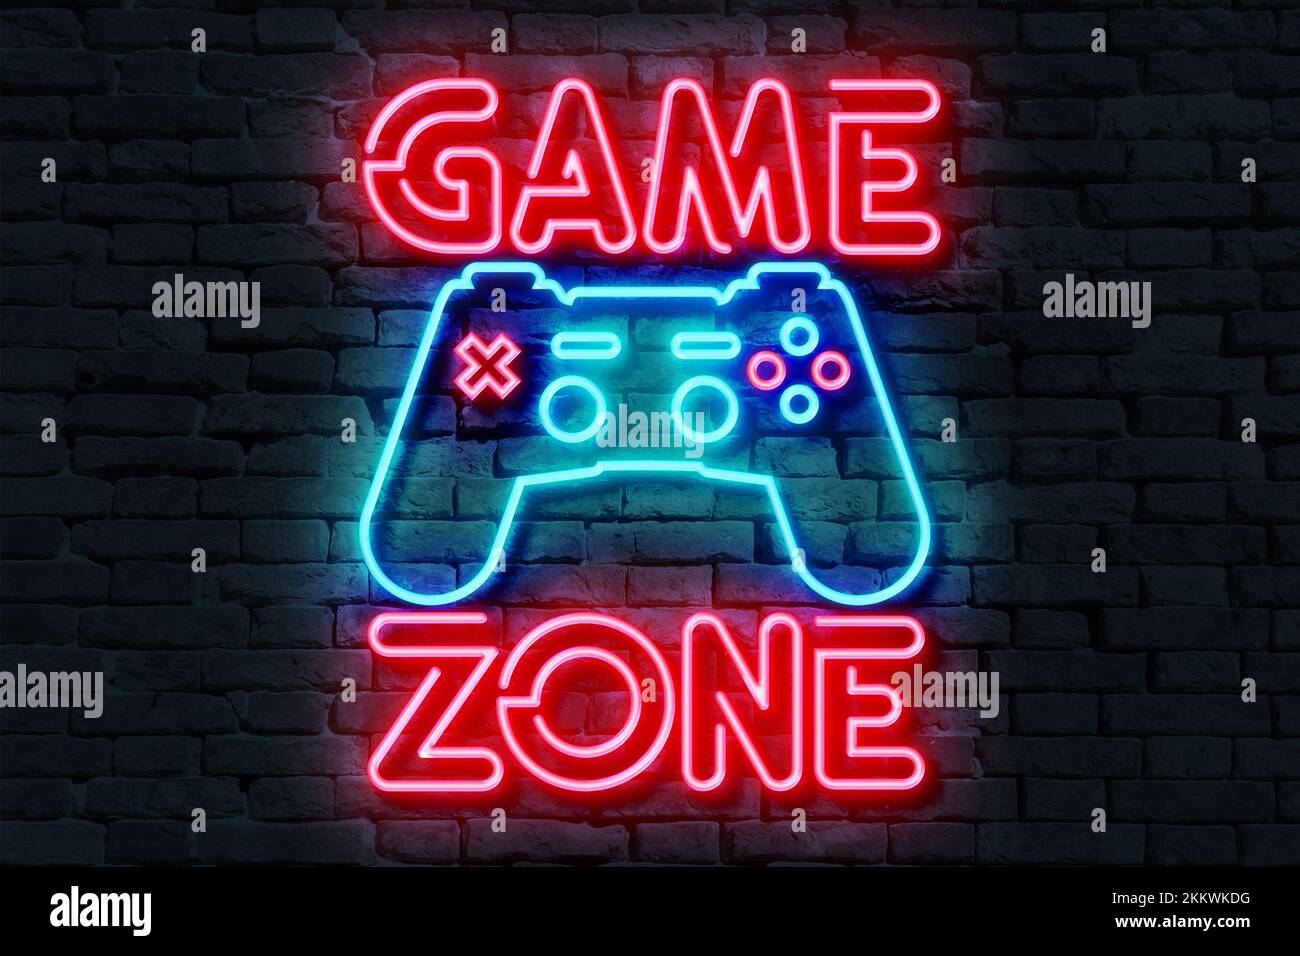 Game Zone Neon Sign 3D illustration on a dark brick background. Stock Photo